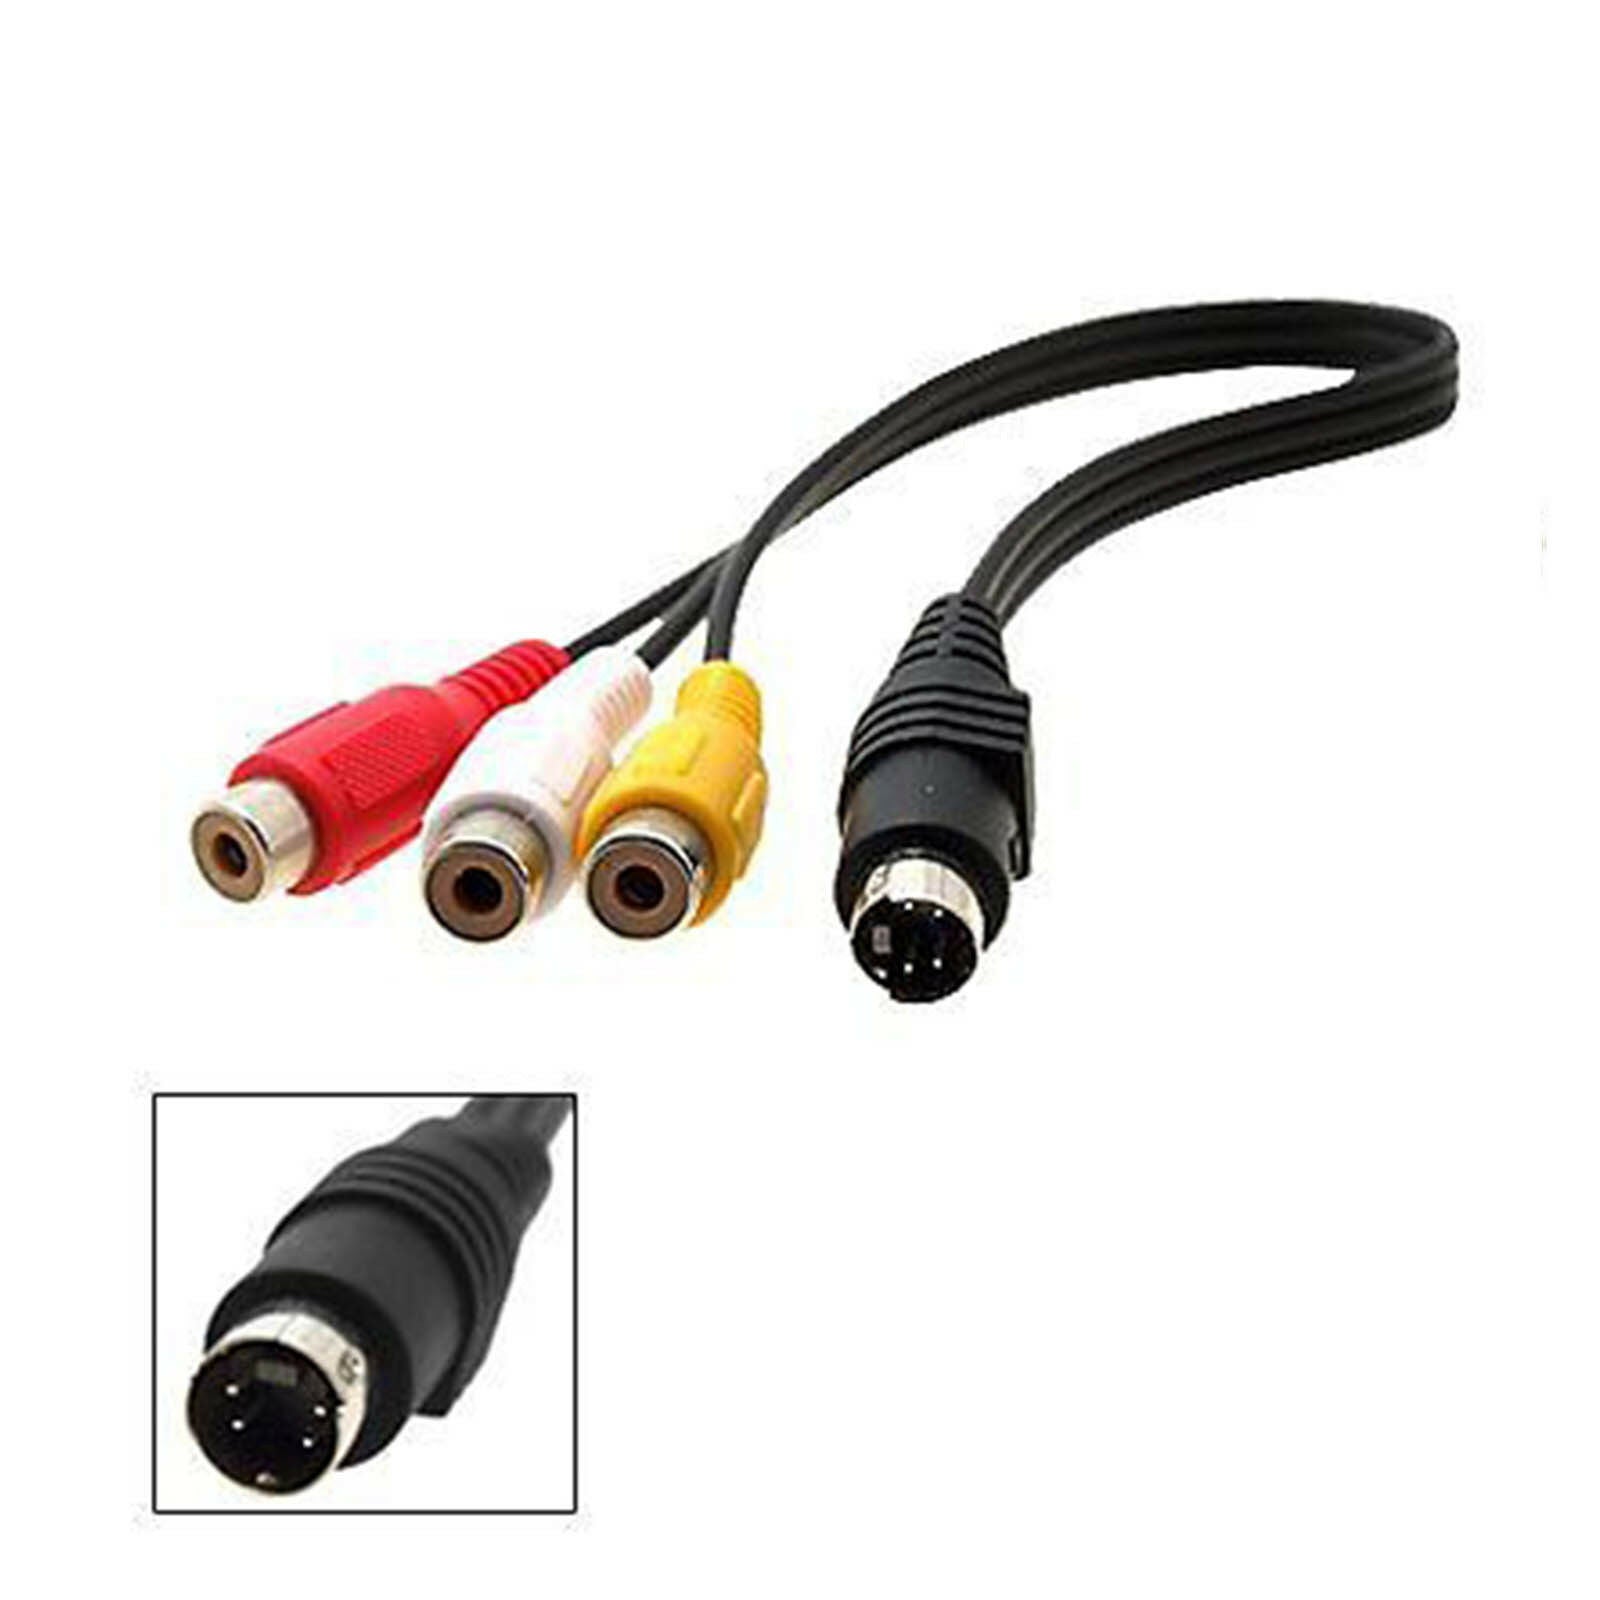 4 Pin S-video male to 3 RCA Female video adapter cable